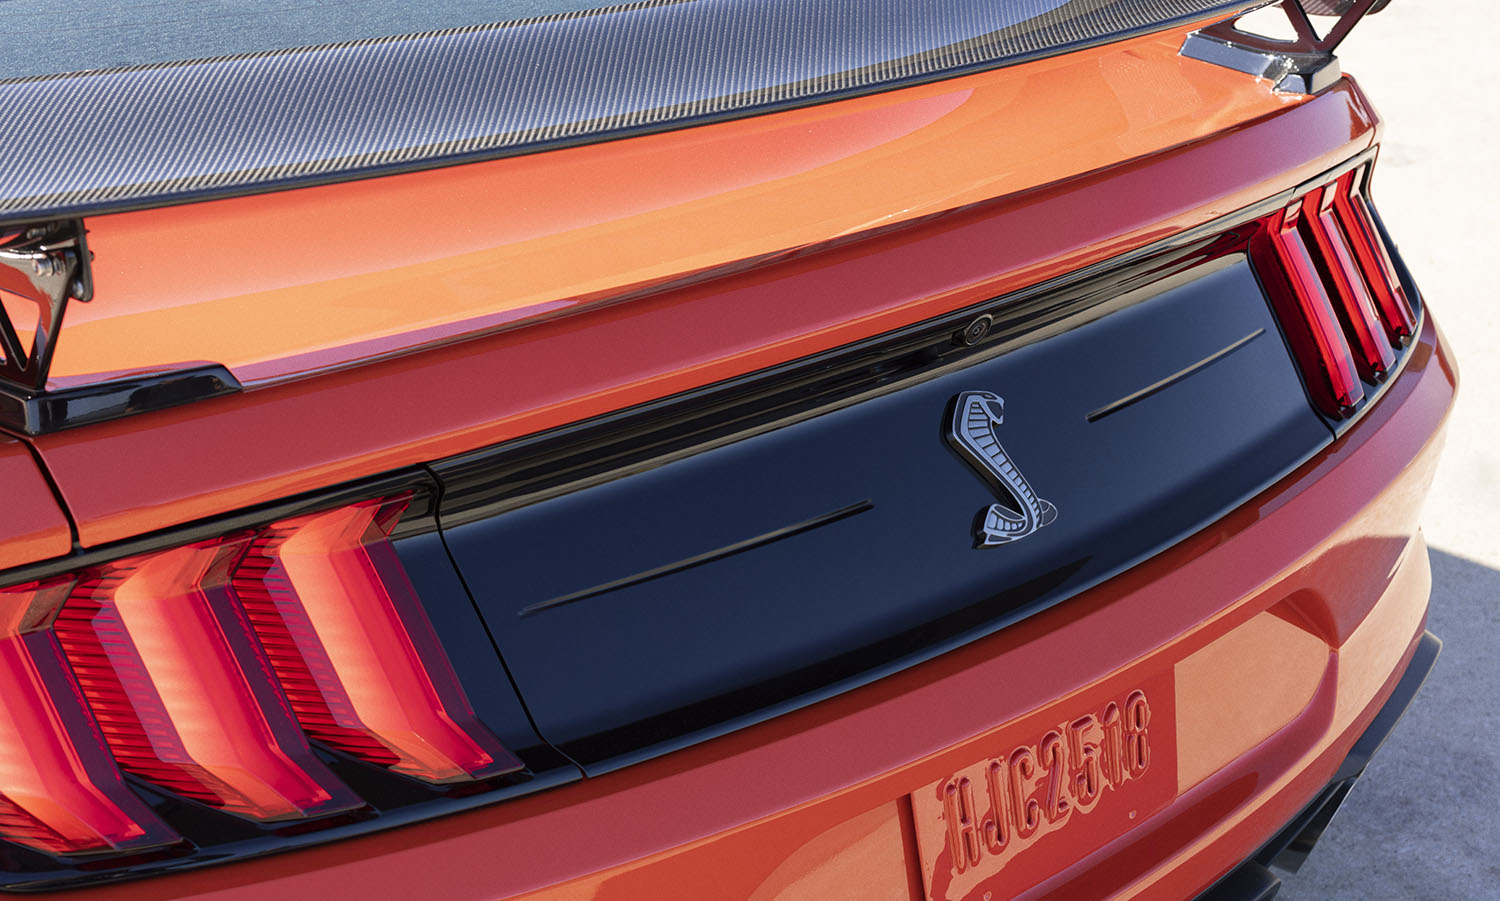 Rear end of an orange 2022 Ford Mustang Shelby GT500